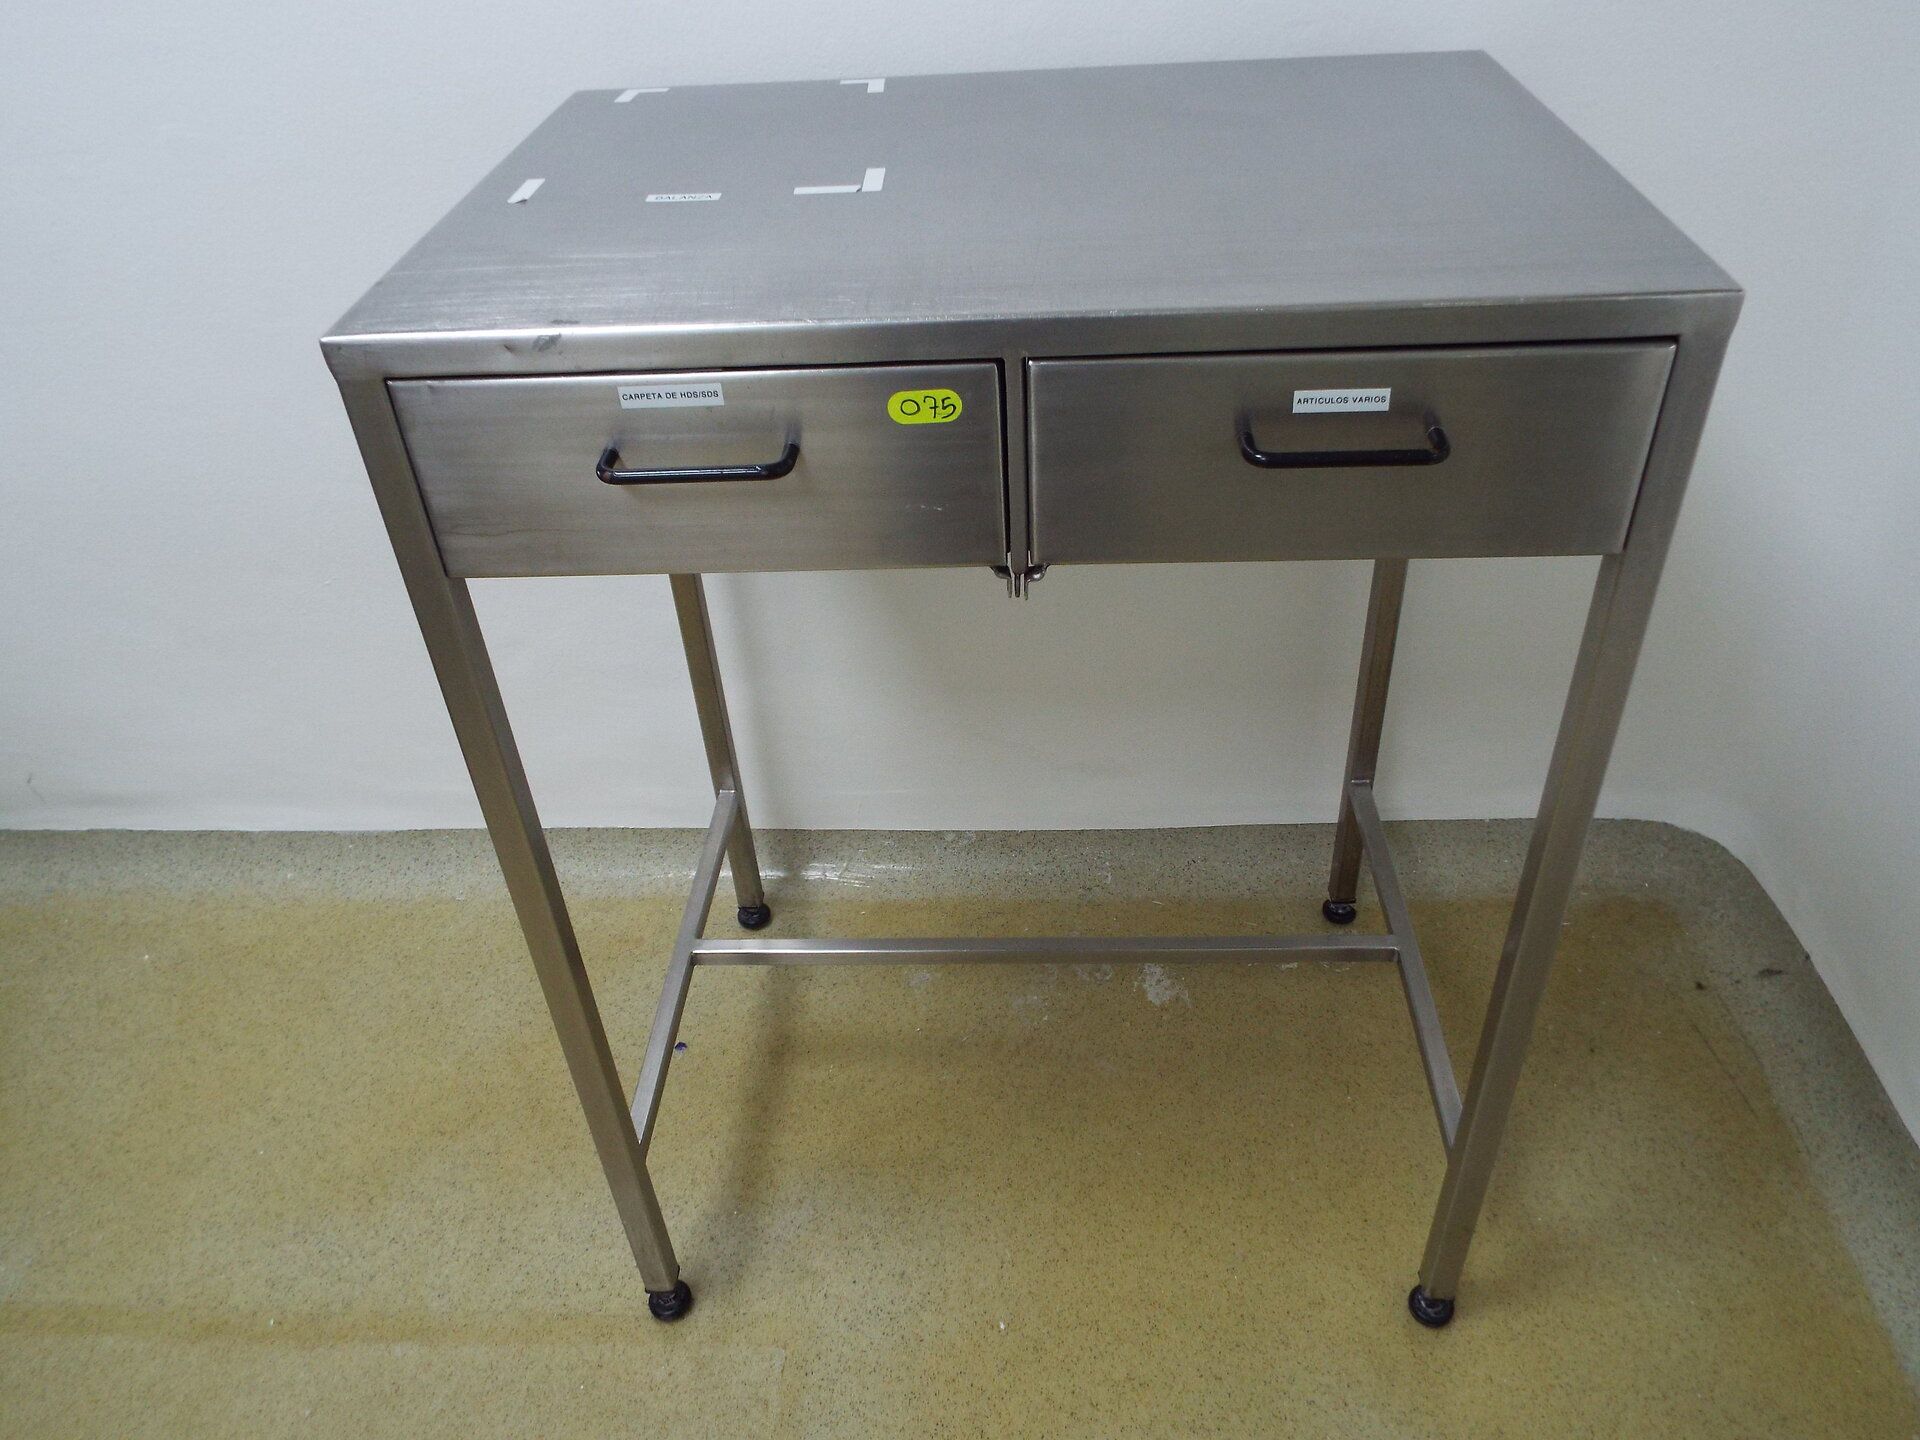 Stainless Steel Table with 2 drawers